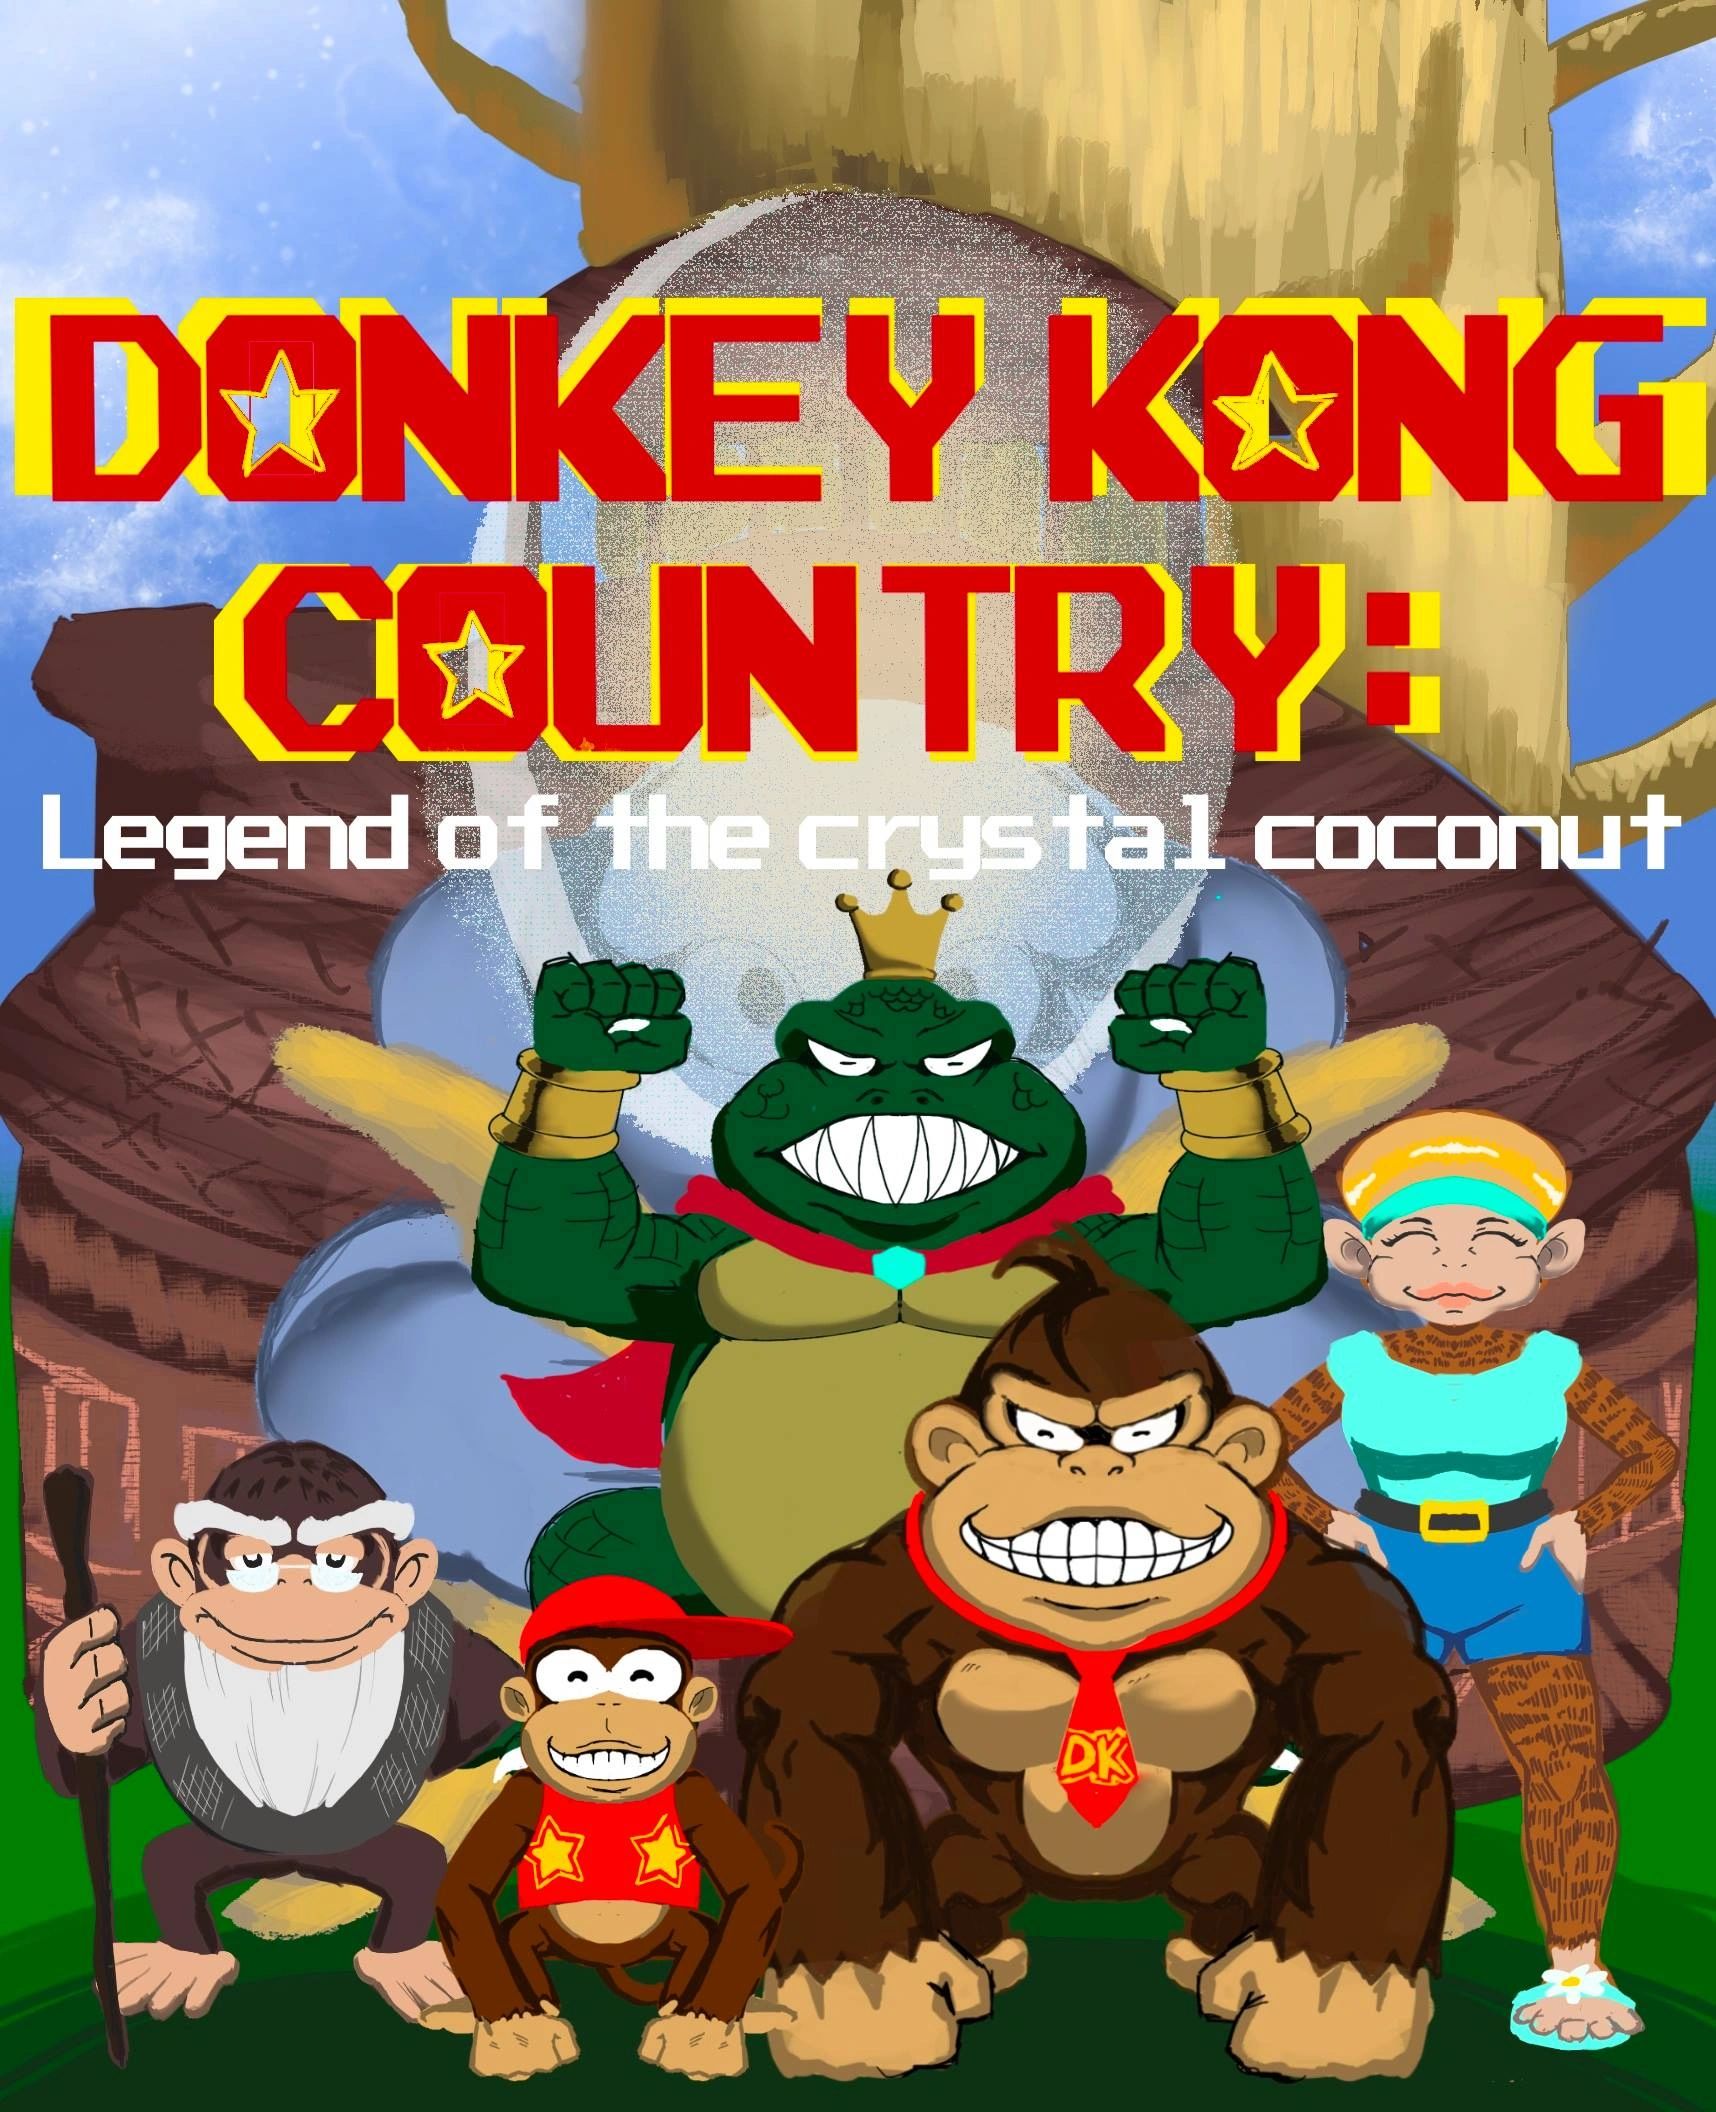 Donkey Kong Country: Legend of the Crystal Coconut